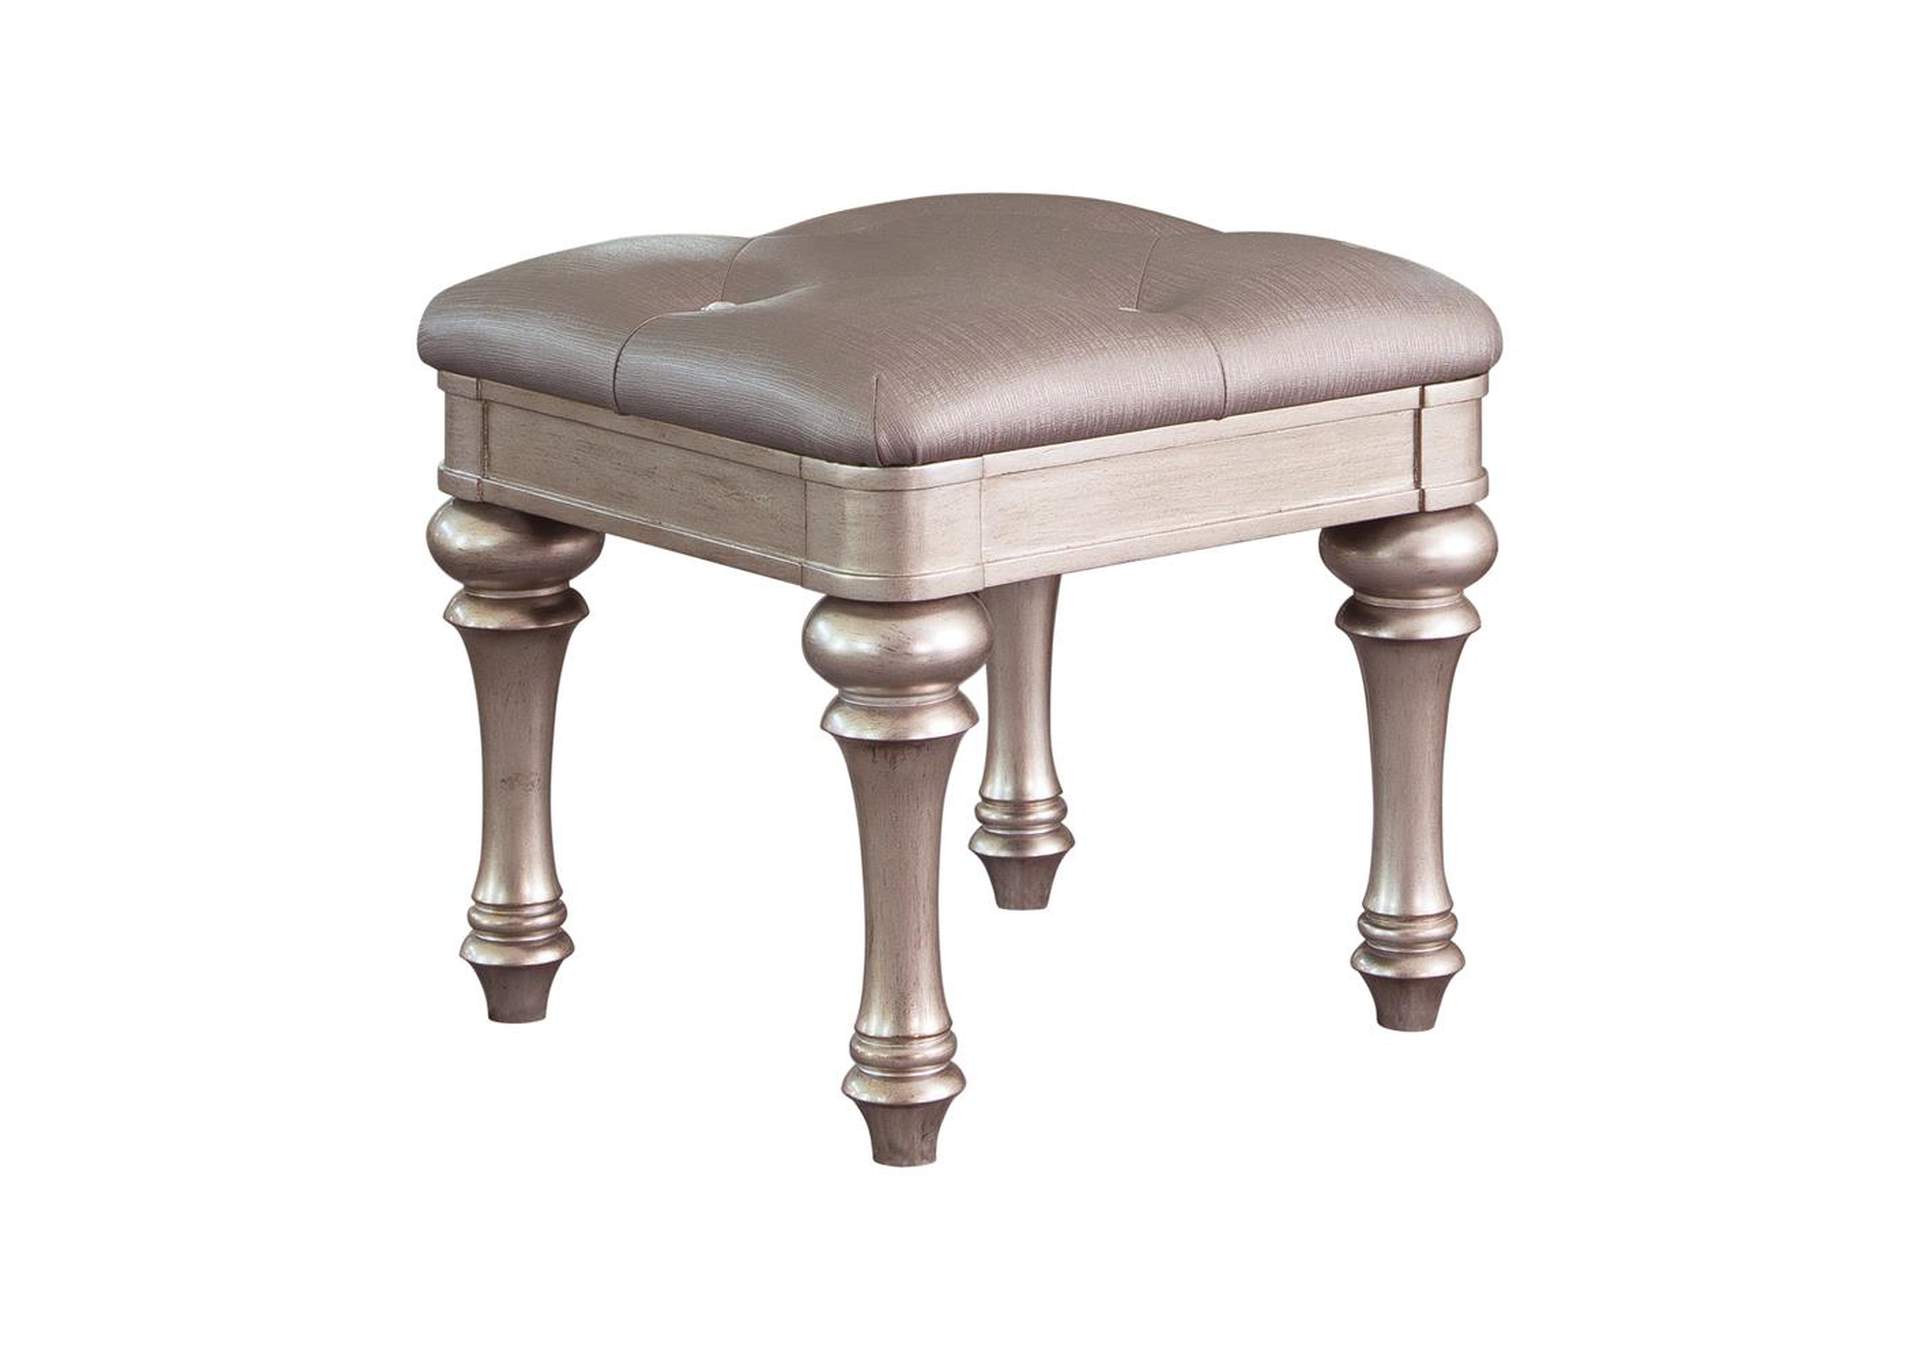 Upholstered Vanity Stool Metallic, Upholstered Vanity Stools And Benches